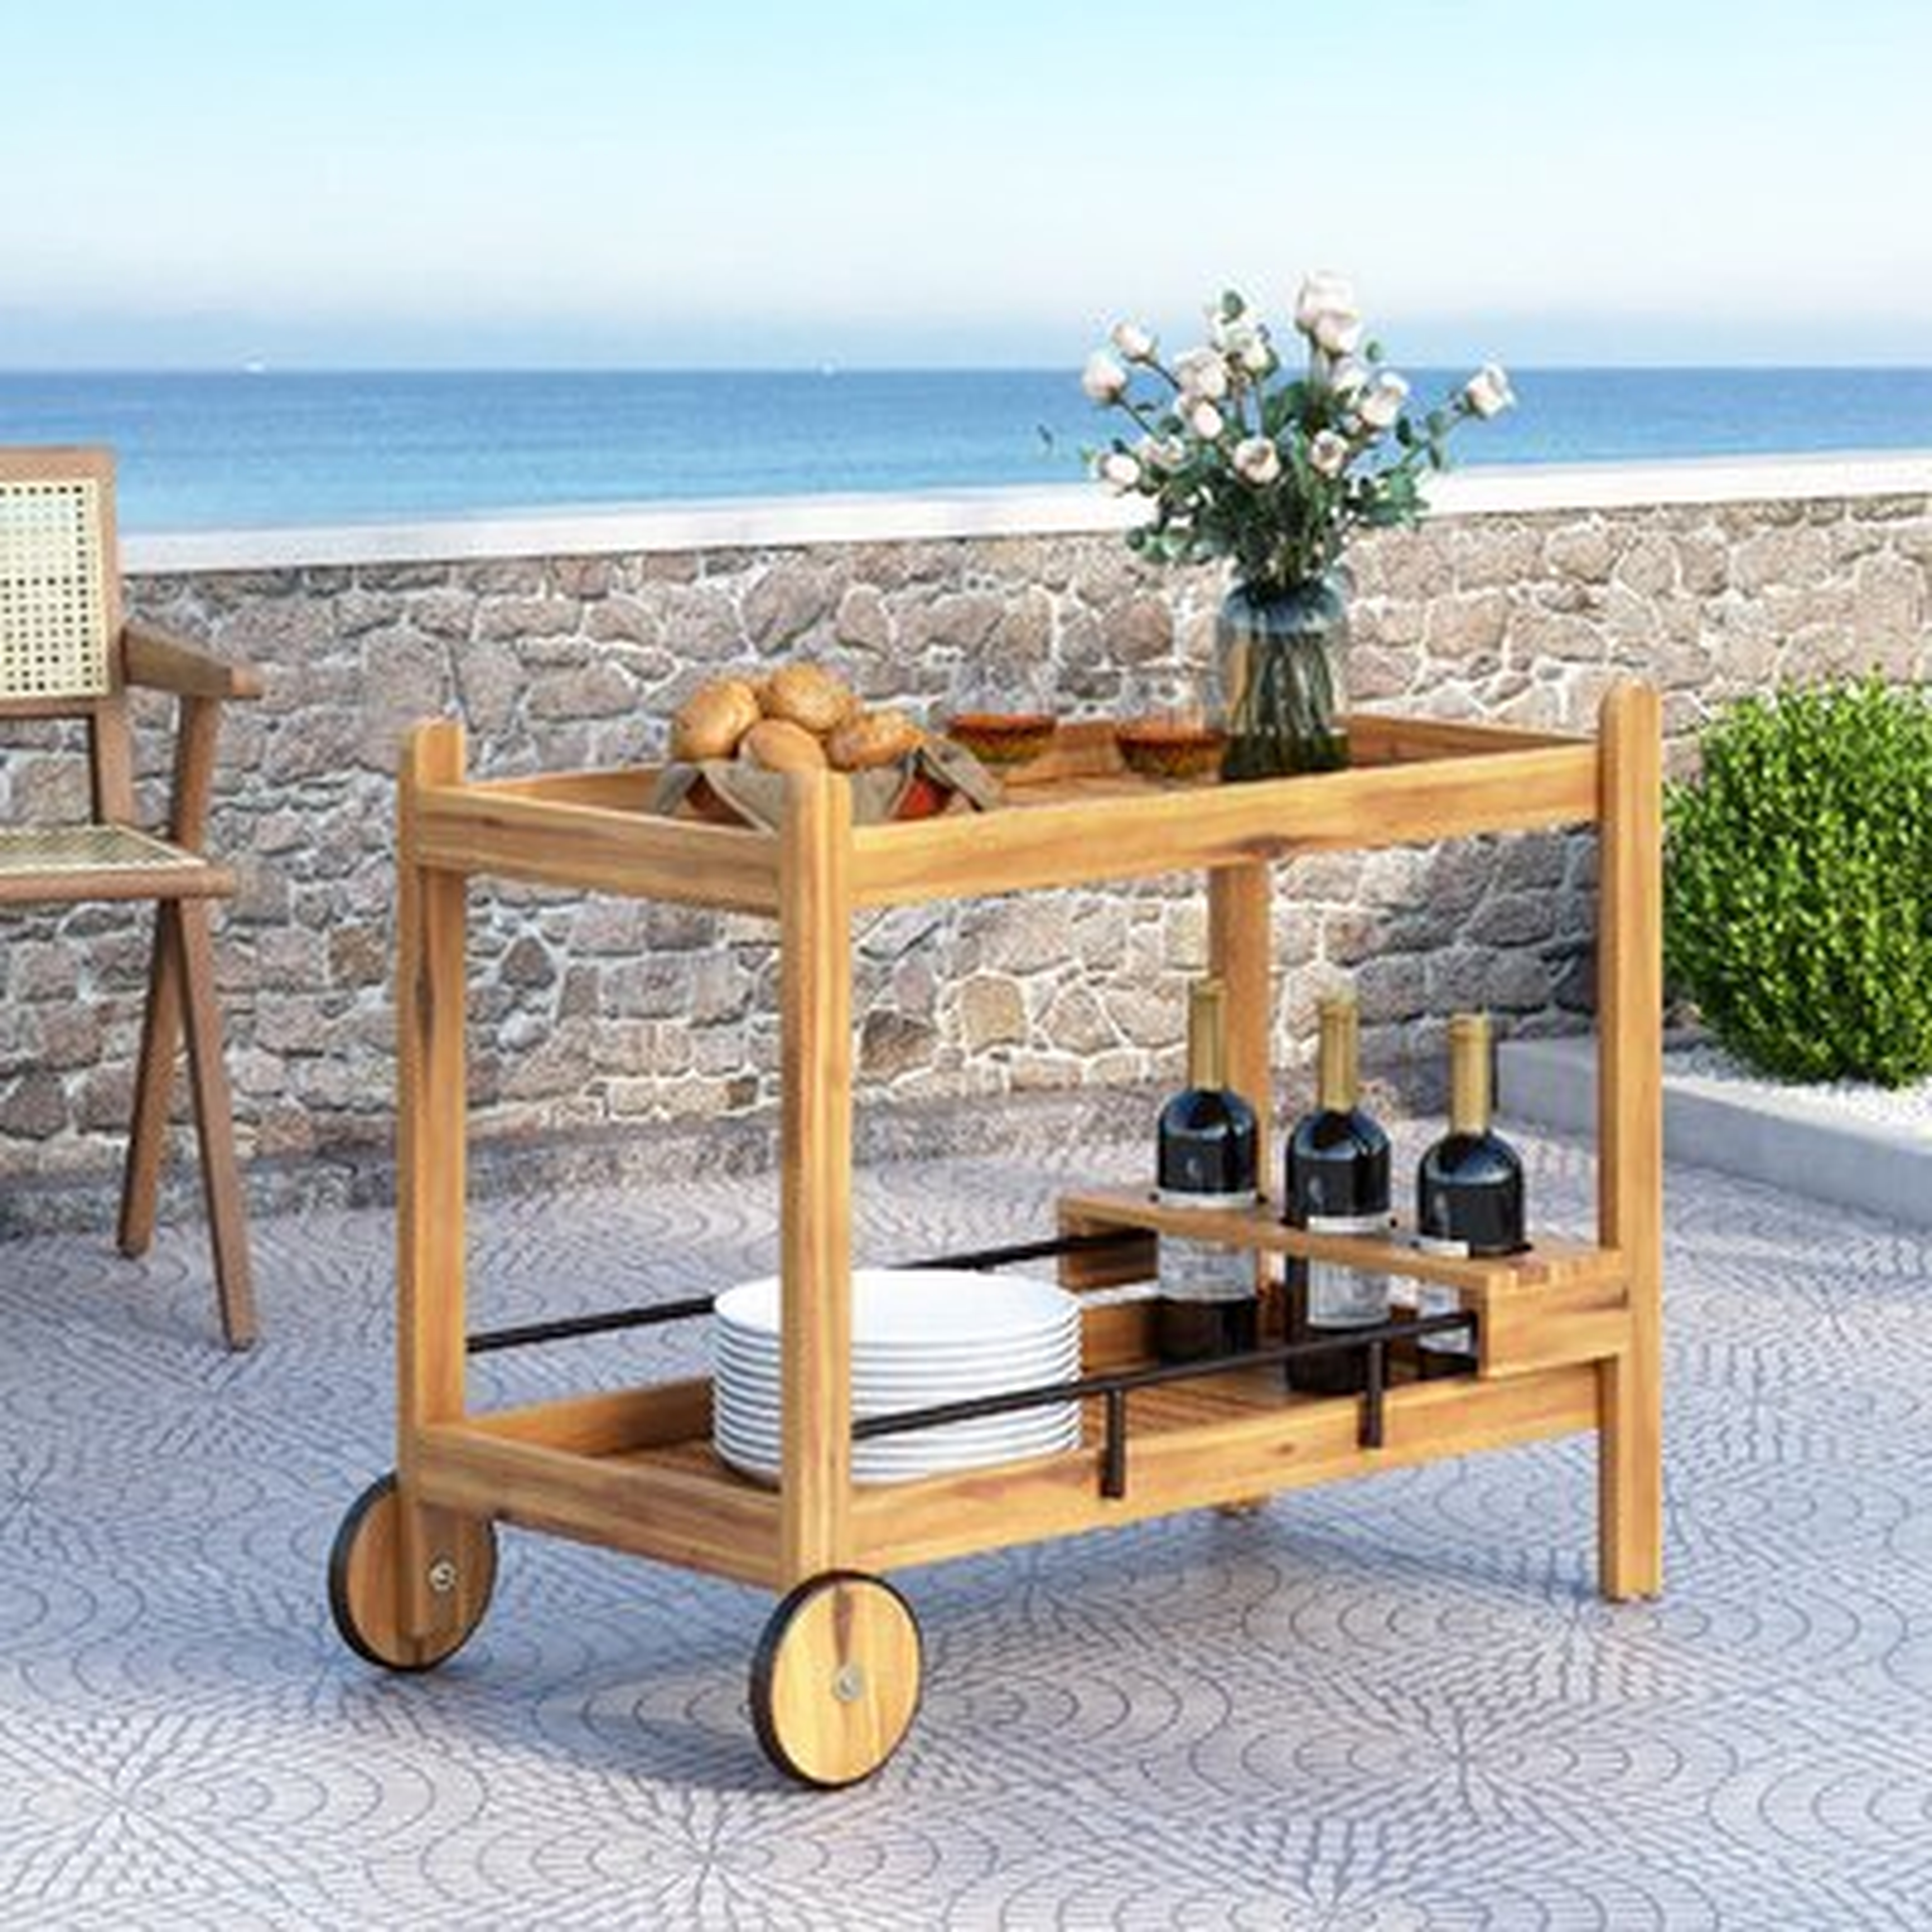 Margeurite Outdoor Acacia Wood 2 Tiered Bar Cart With Bottle Holders - Wayfair